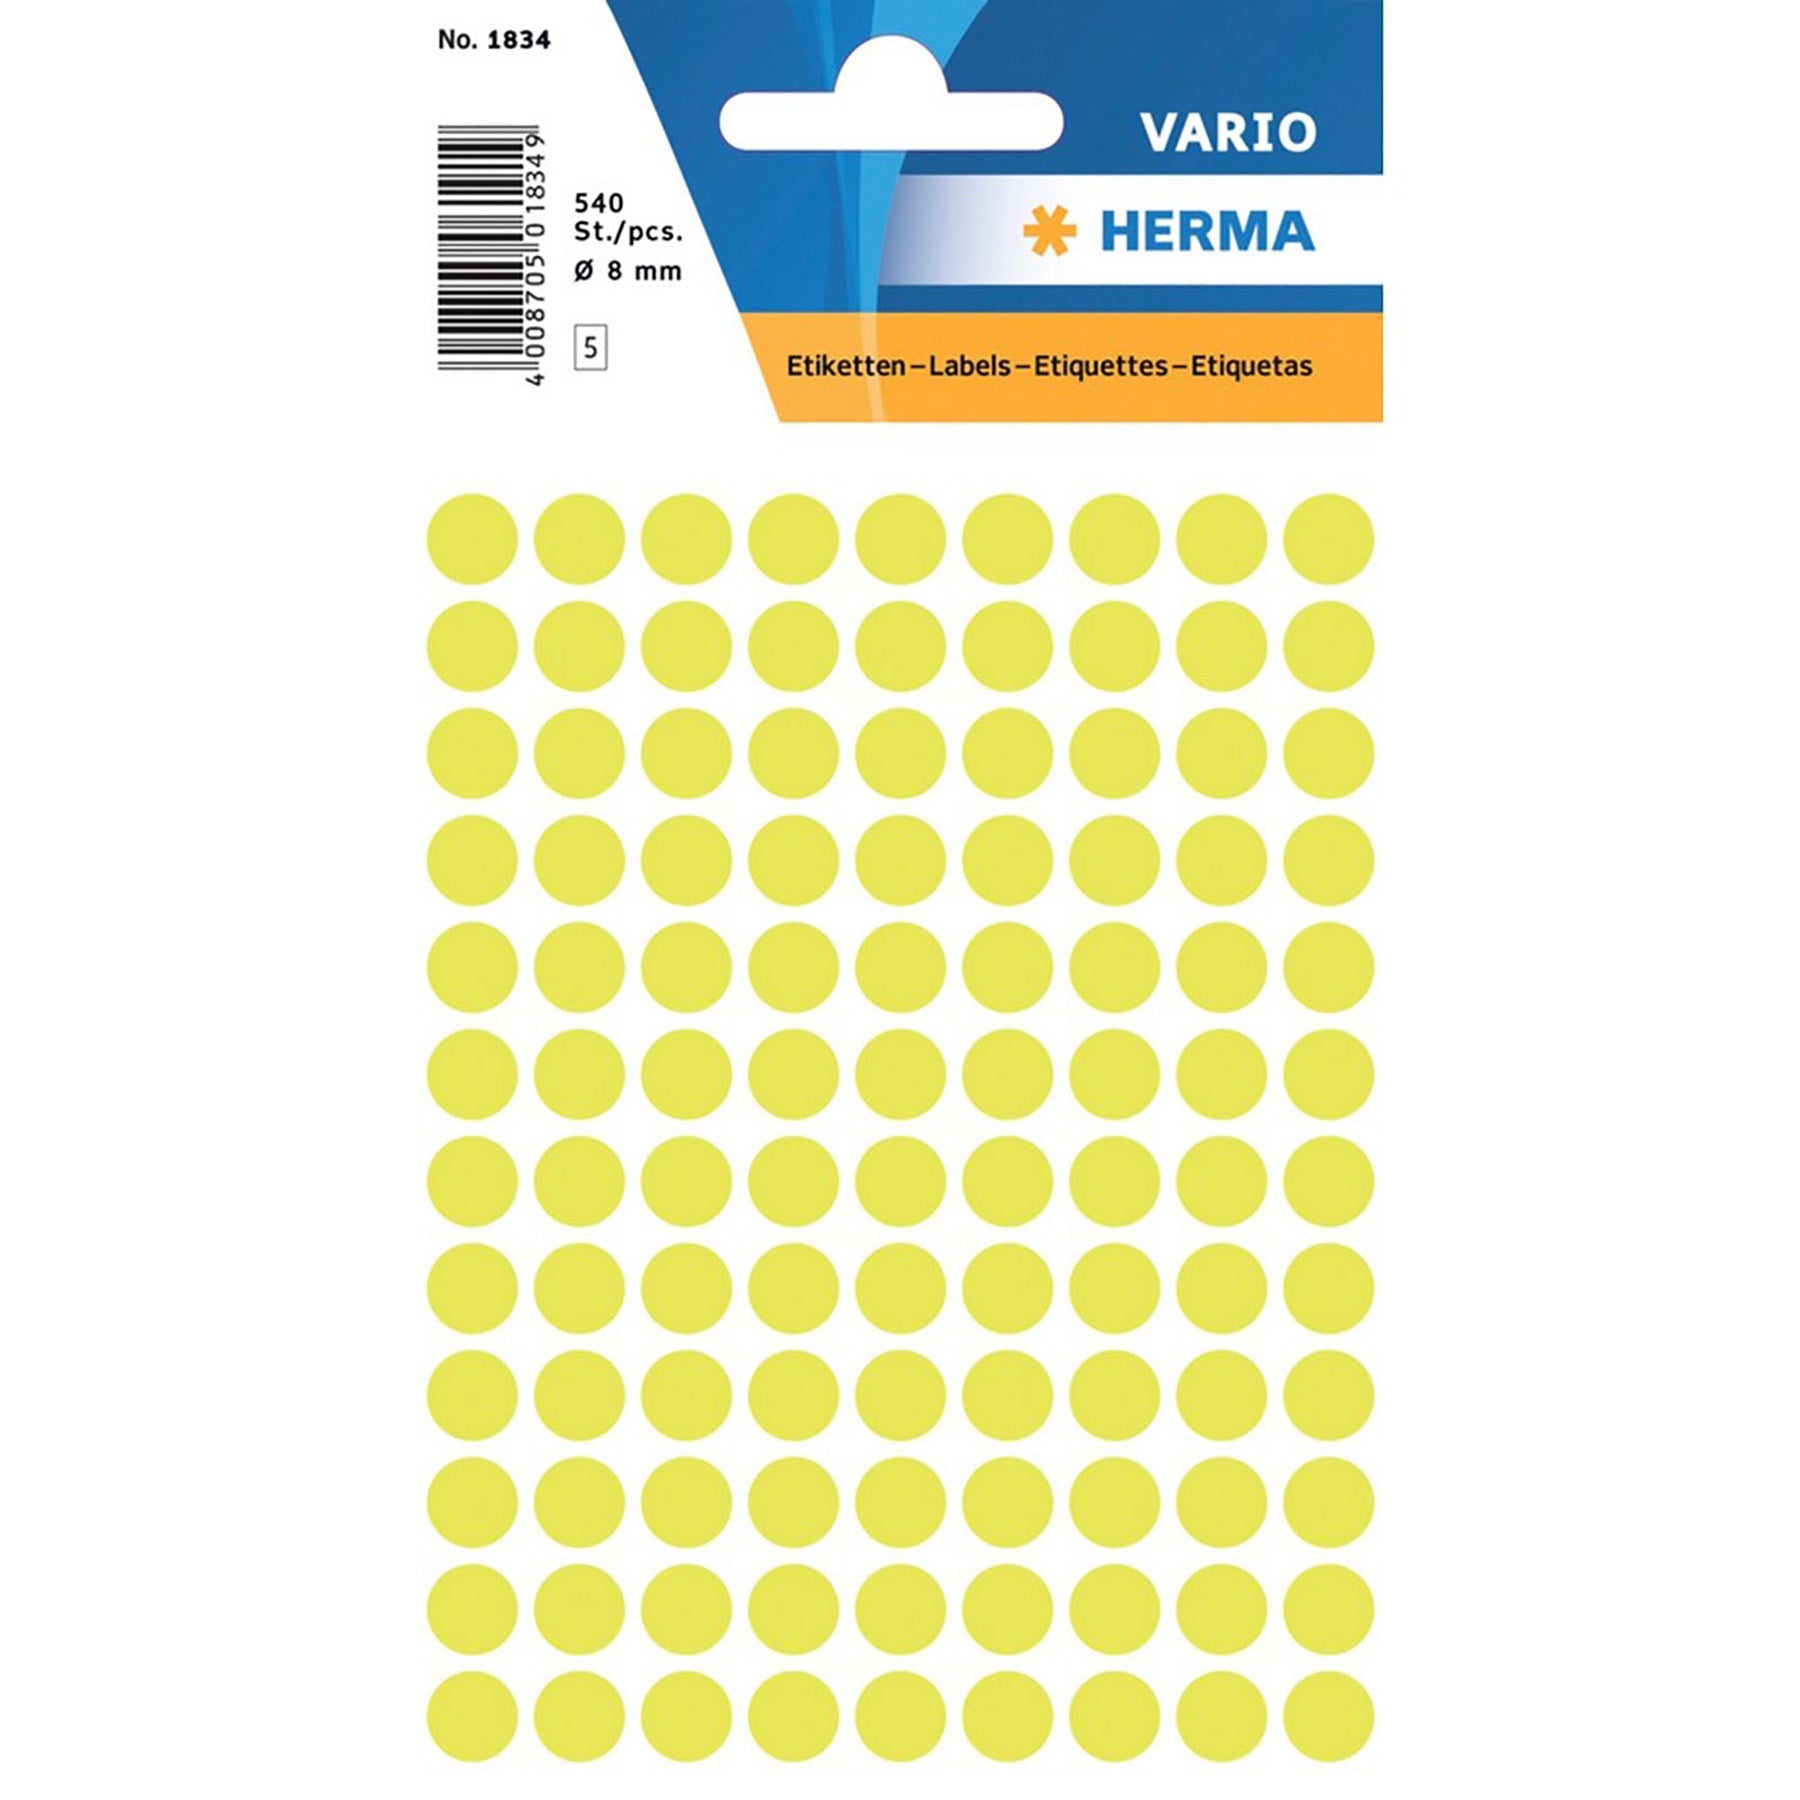 Herma Vario 5 Sheets Colour-Coding Round Labels Dots, Fluo Yellow 0.31in